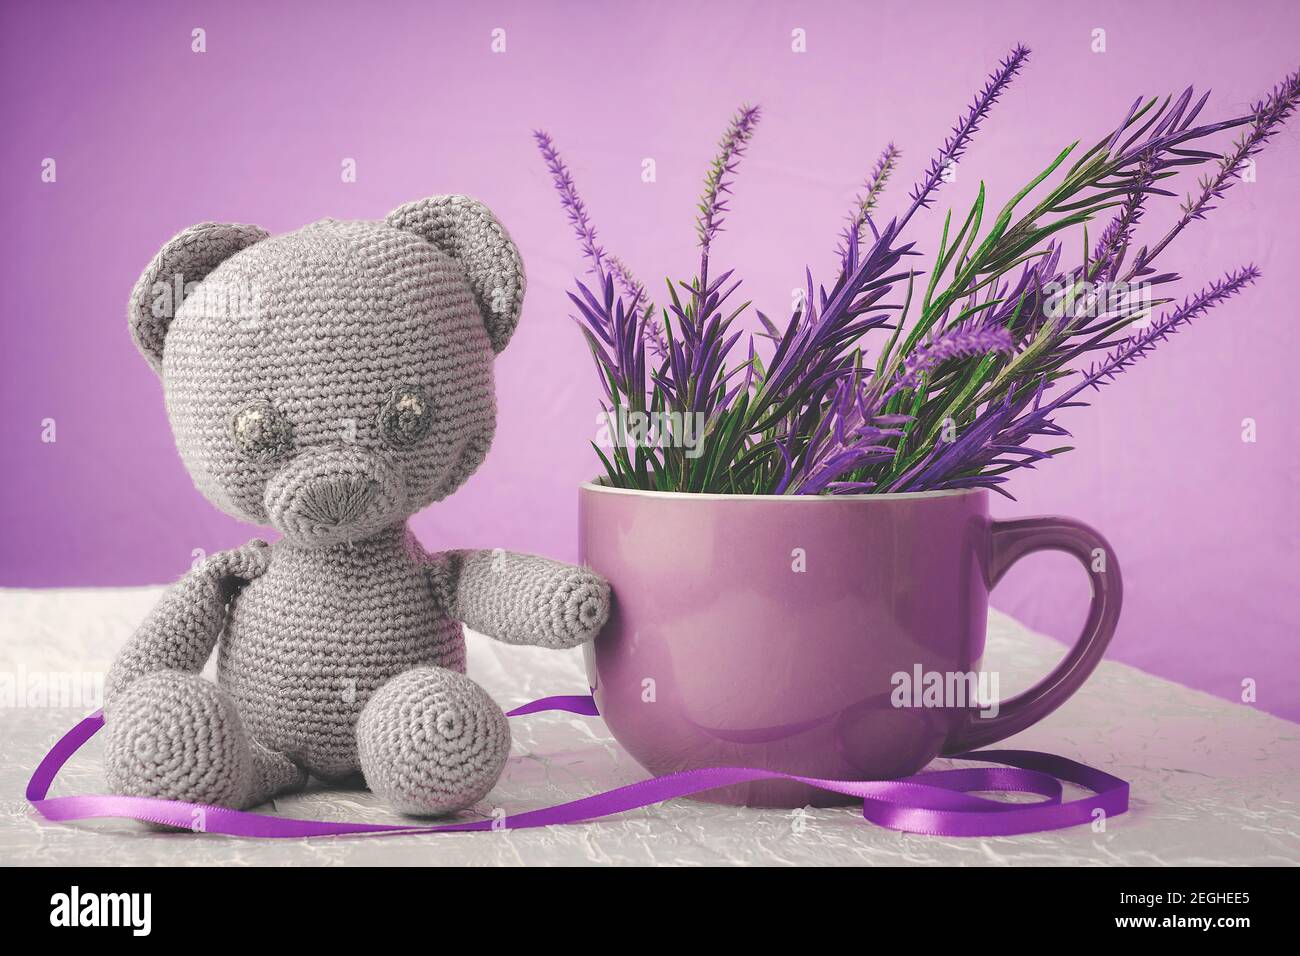 Handmade toy bear of gray color, next to a large mug Stock Photo